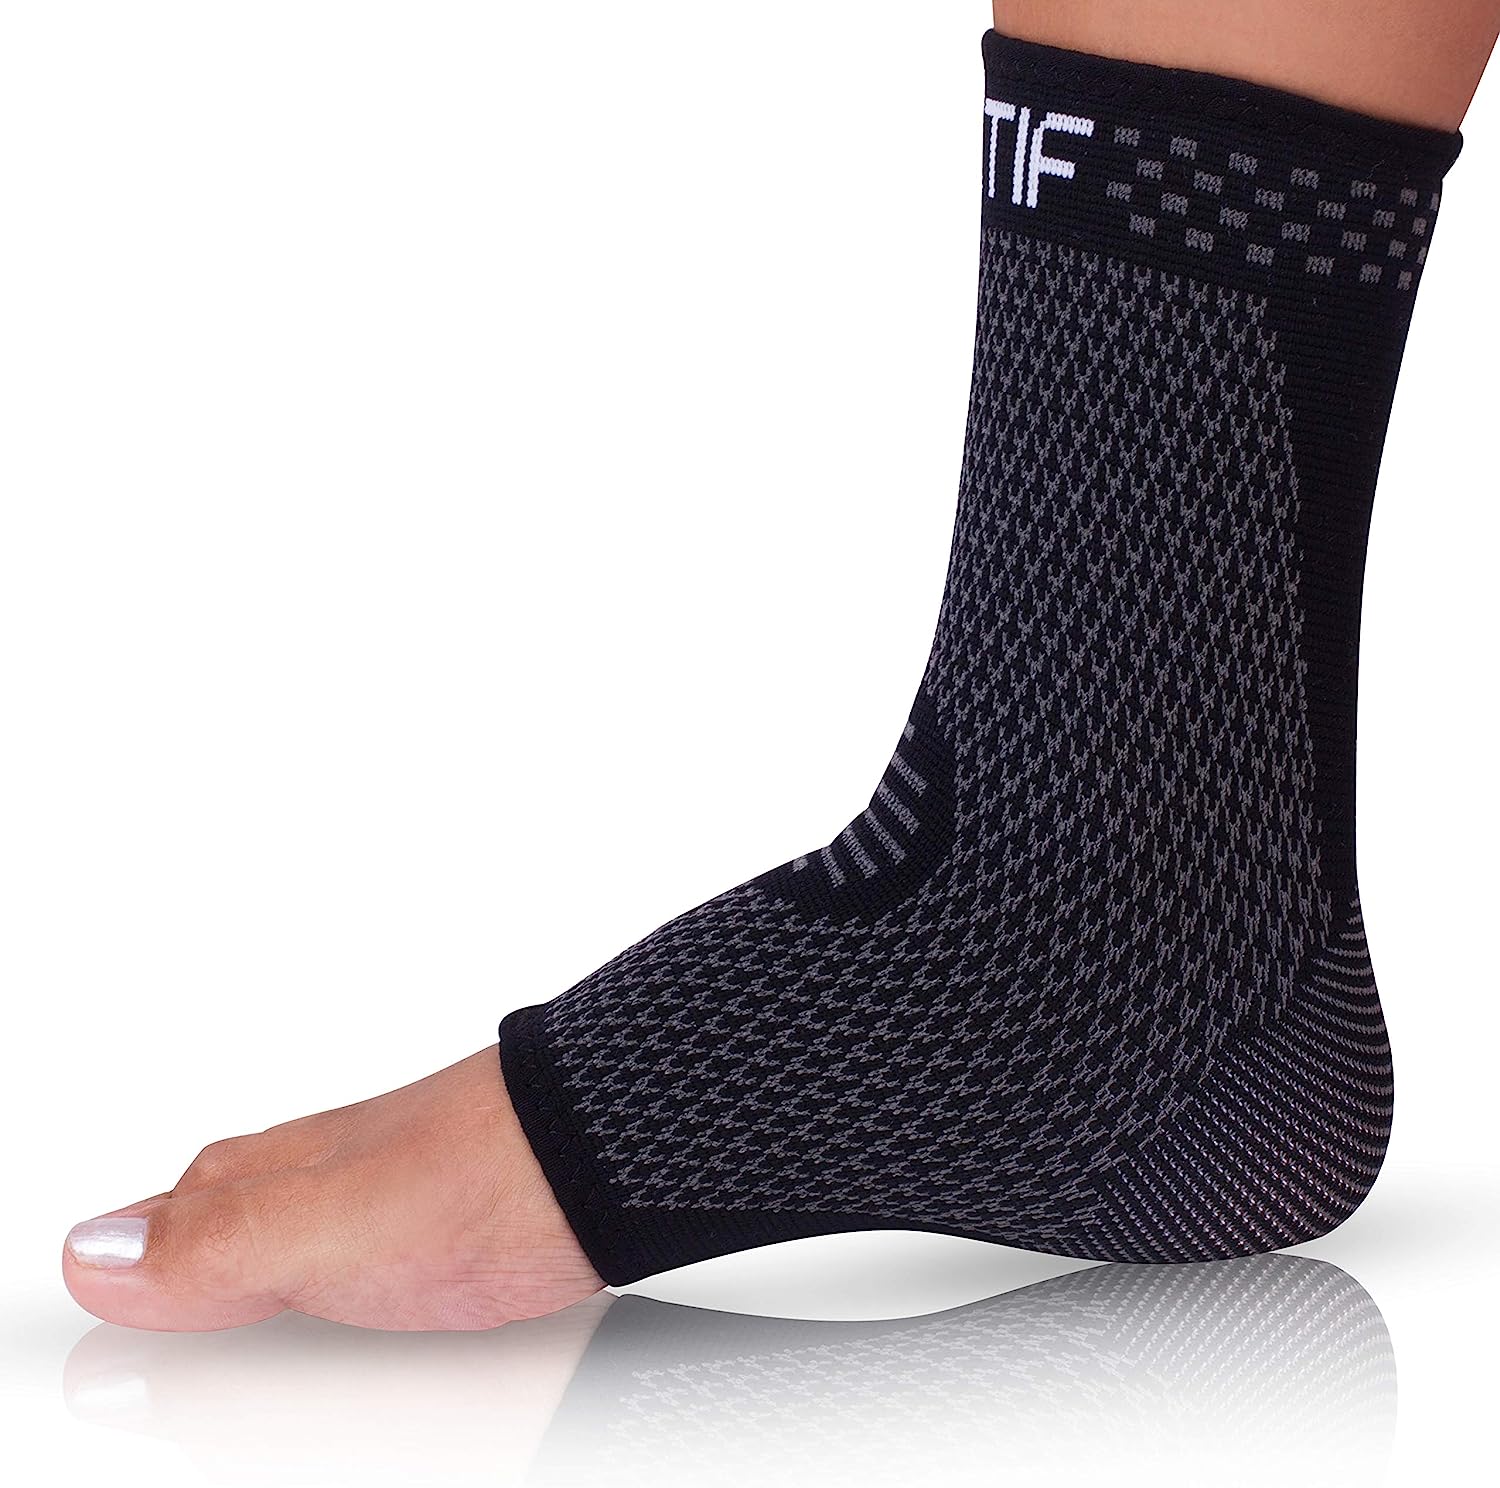 Actif Sports Ankle Compression Sleeve (Small US Size 4-7)